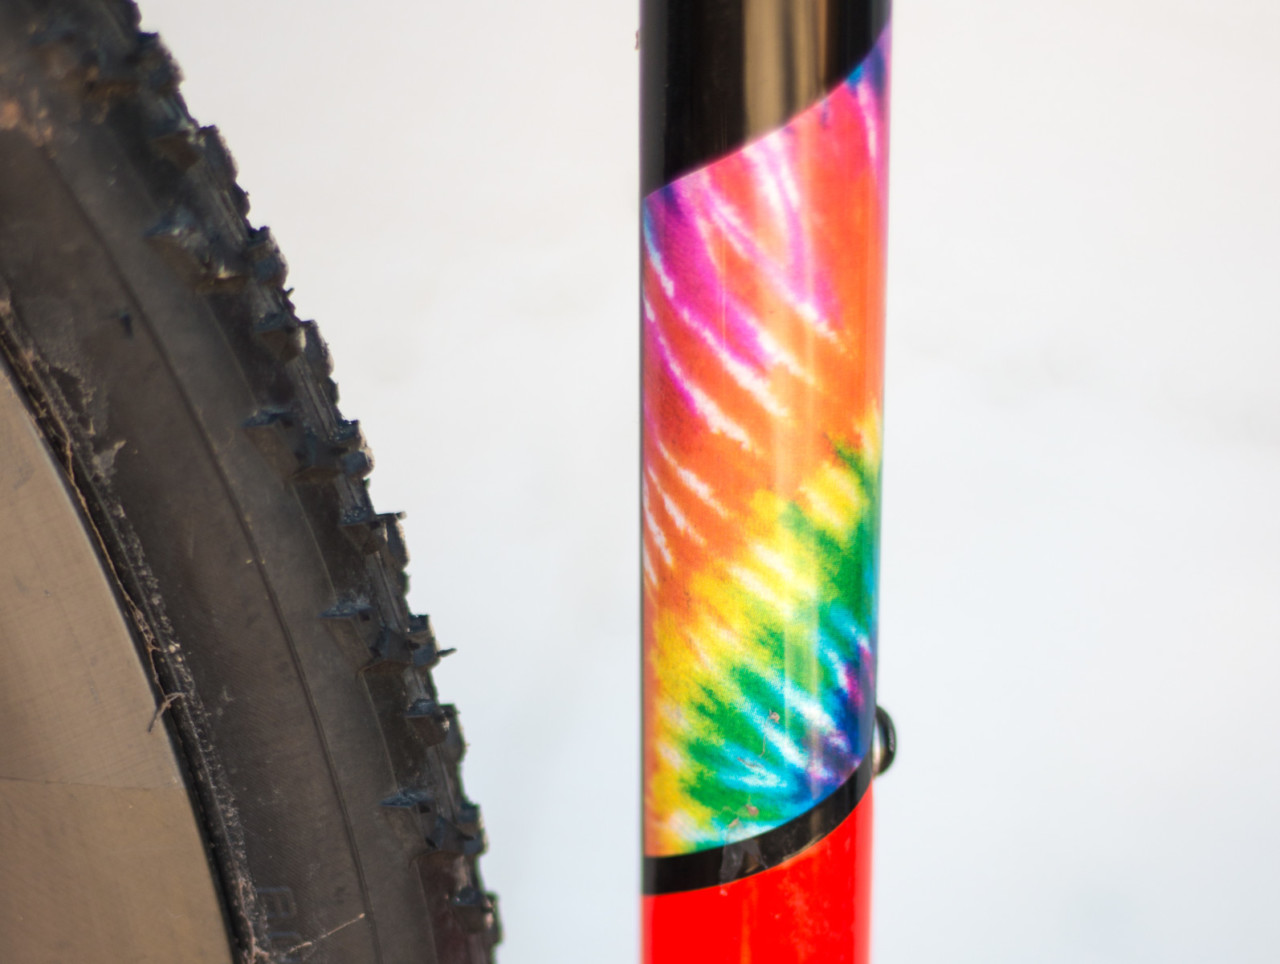 Love it or hate it, the tie-dye graphics differentiate the 2018 Specialized S-Works CruX cyclocross bike. Hate it? They're adhesive graphics, not paint, and might be removable with care. Or opt for the frameset only, which comes in a black and white color scheme. © Cyclocross Magazine